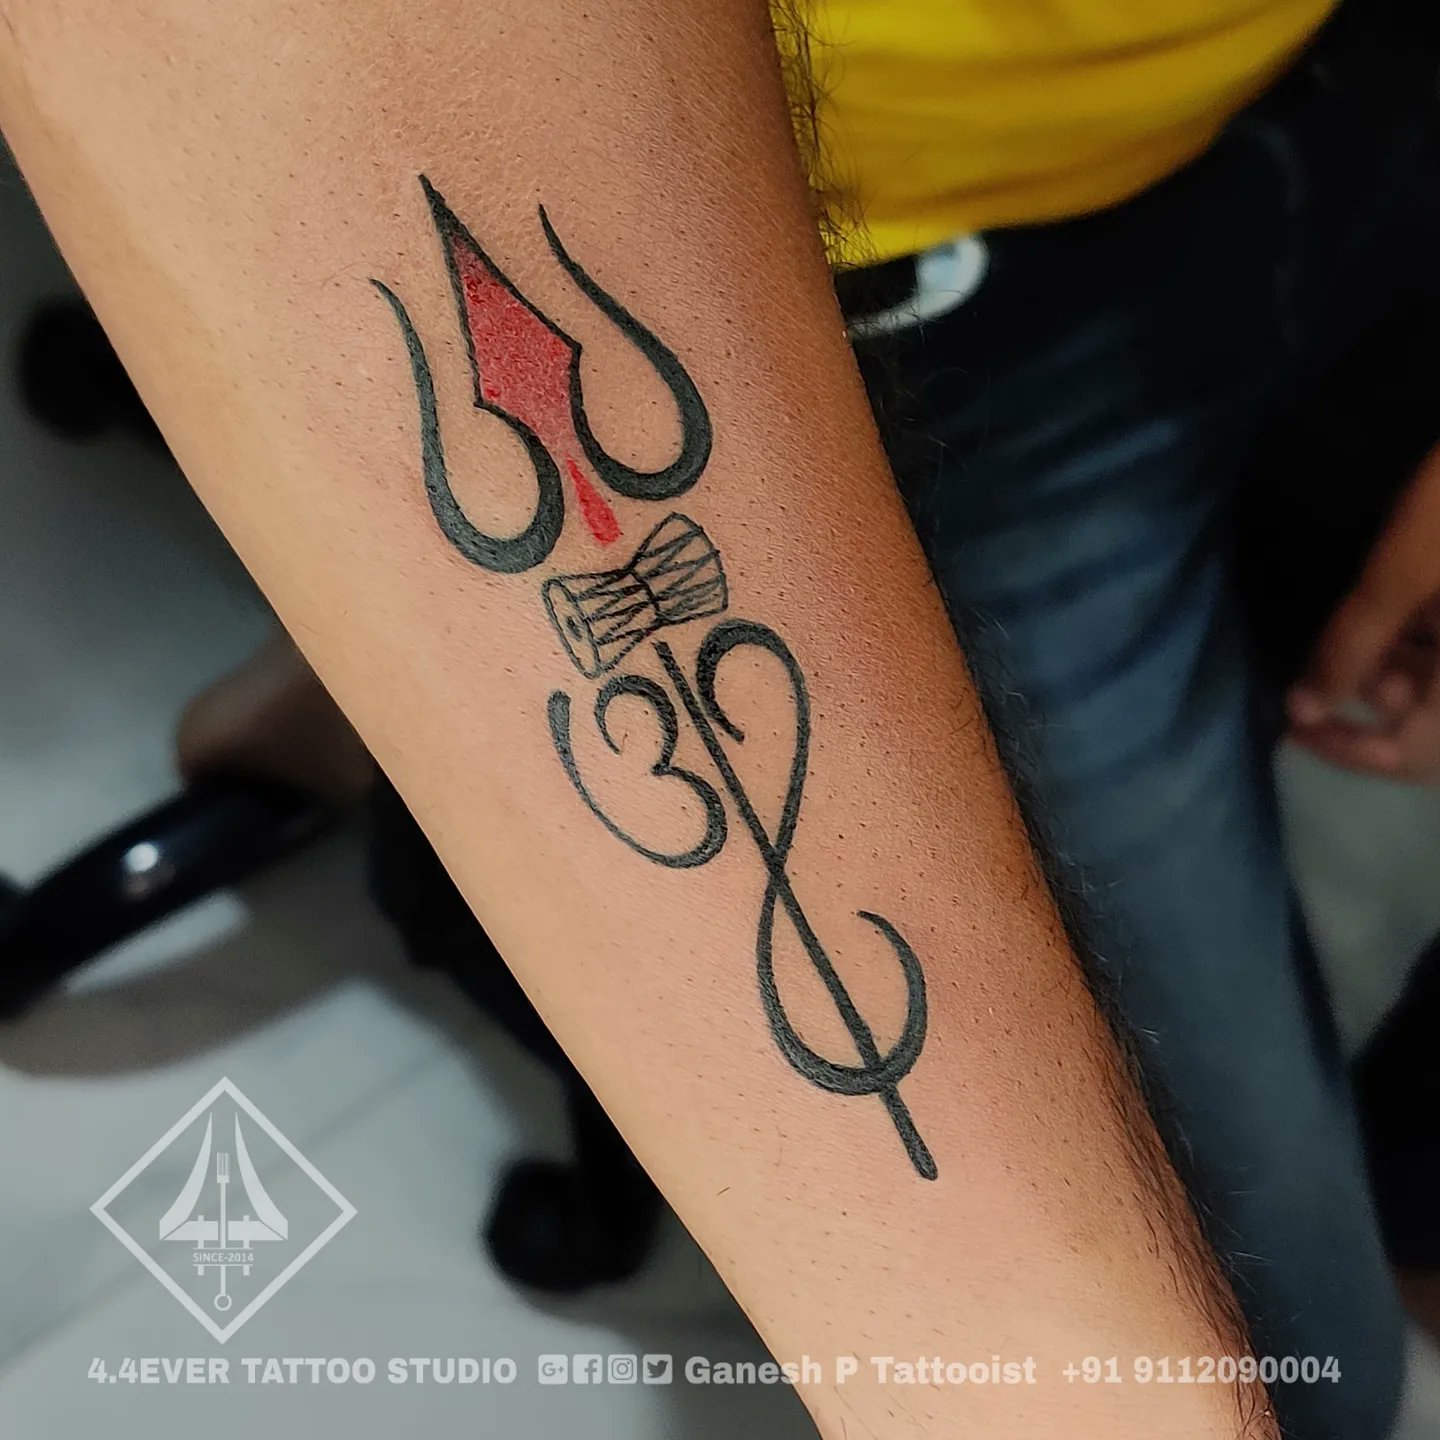 NA Tattoo Studio  Dreamcatcher Tattoo with Feather done by Tattoos by  Megha at NA Tattoo Studio For Appointments 8800878580 or email   newdelhitattoogmailcom dreamcatchertattoo feathertattoo feather  natattoostudio tattoo ink inked 